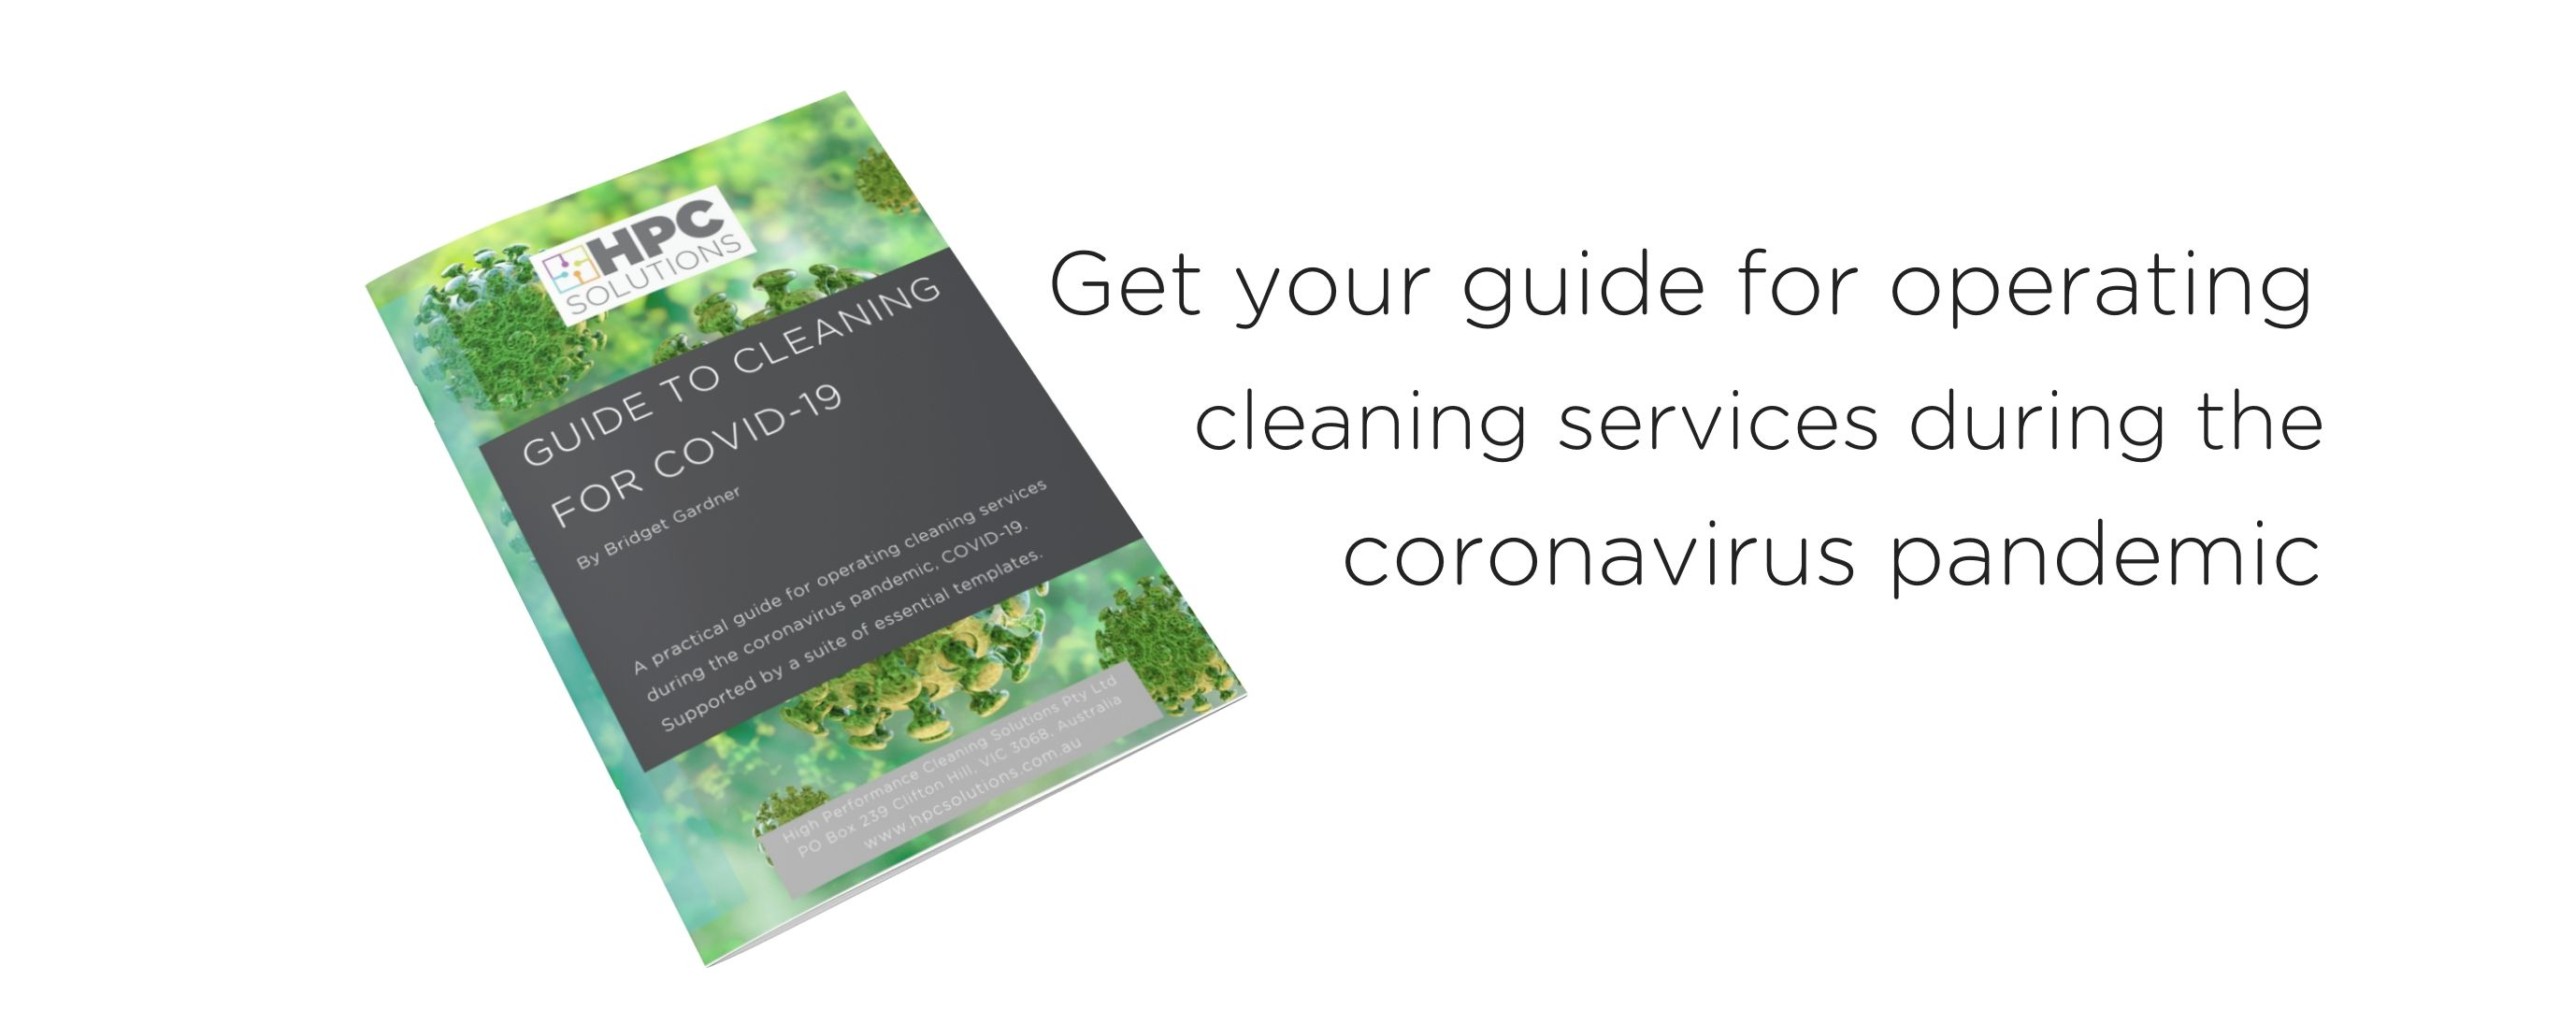 The Guide to Cleaning for COVID-19